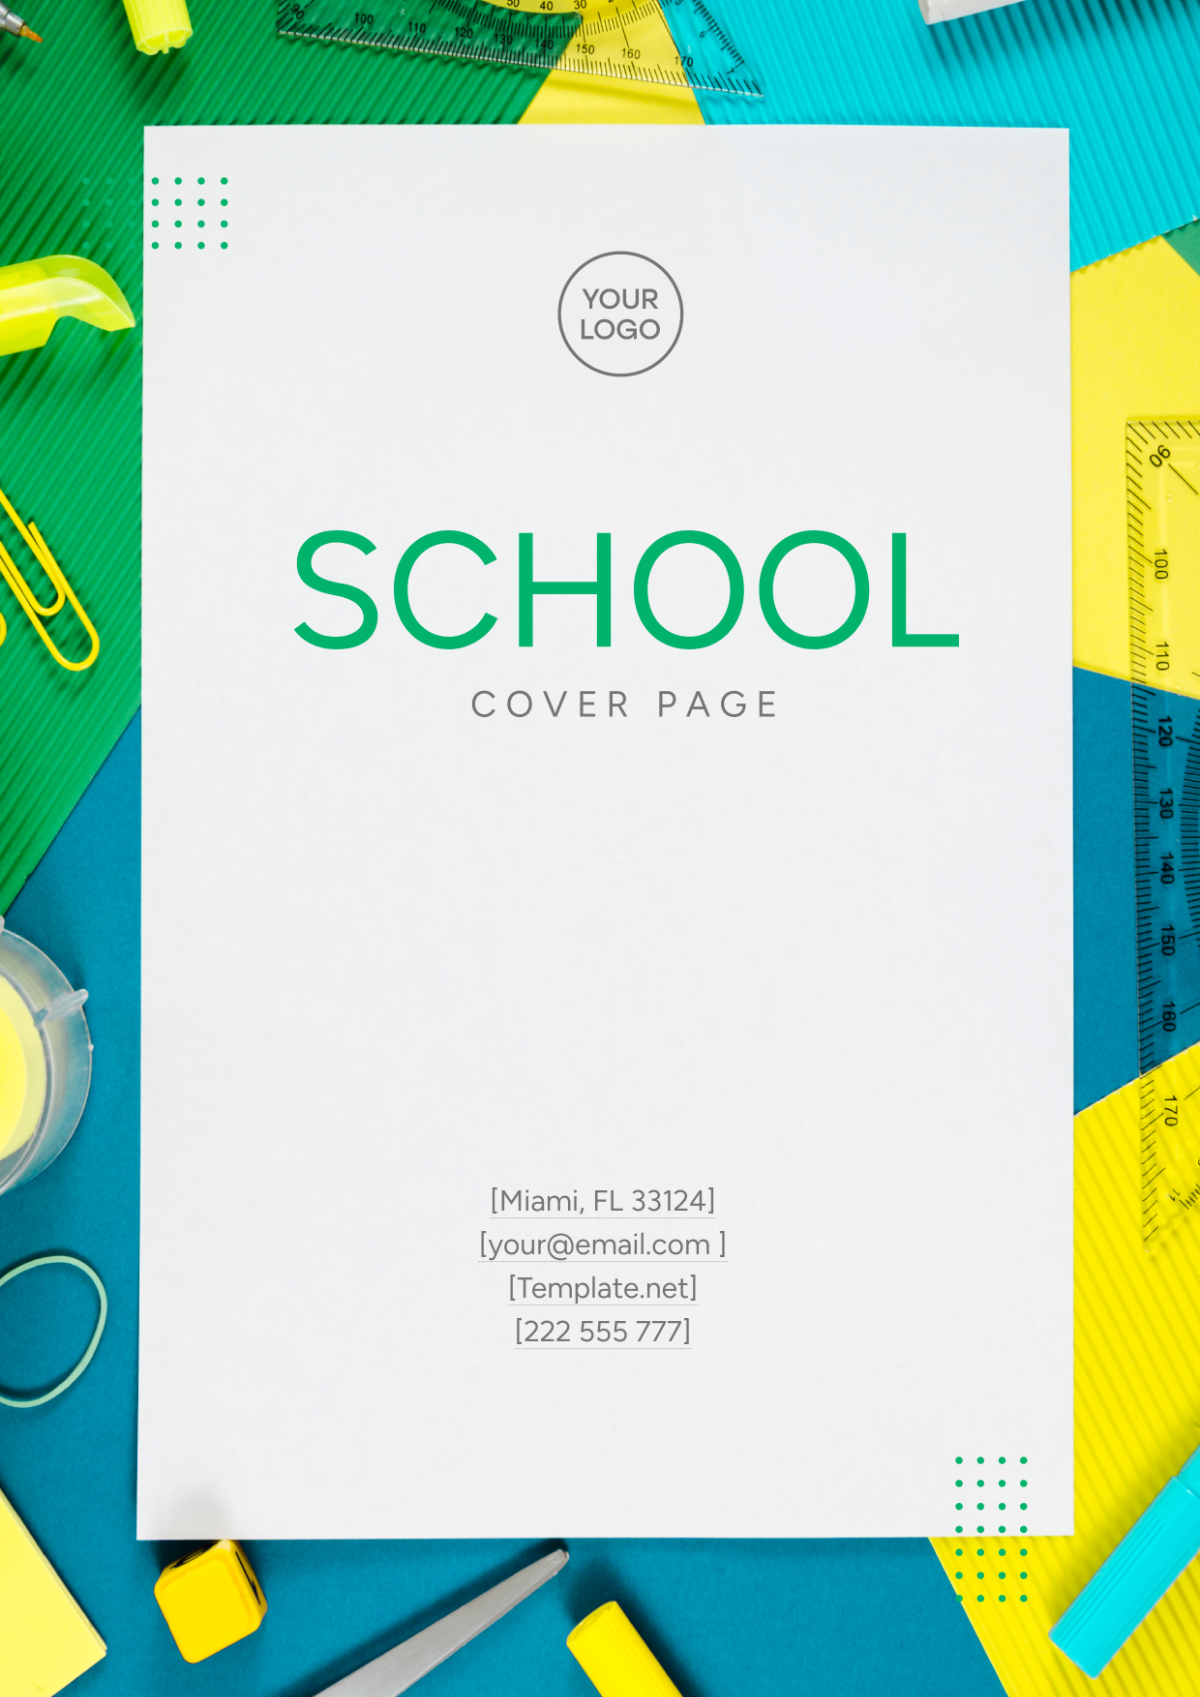 School Cover Page Image Template